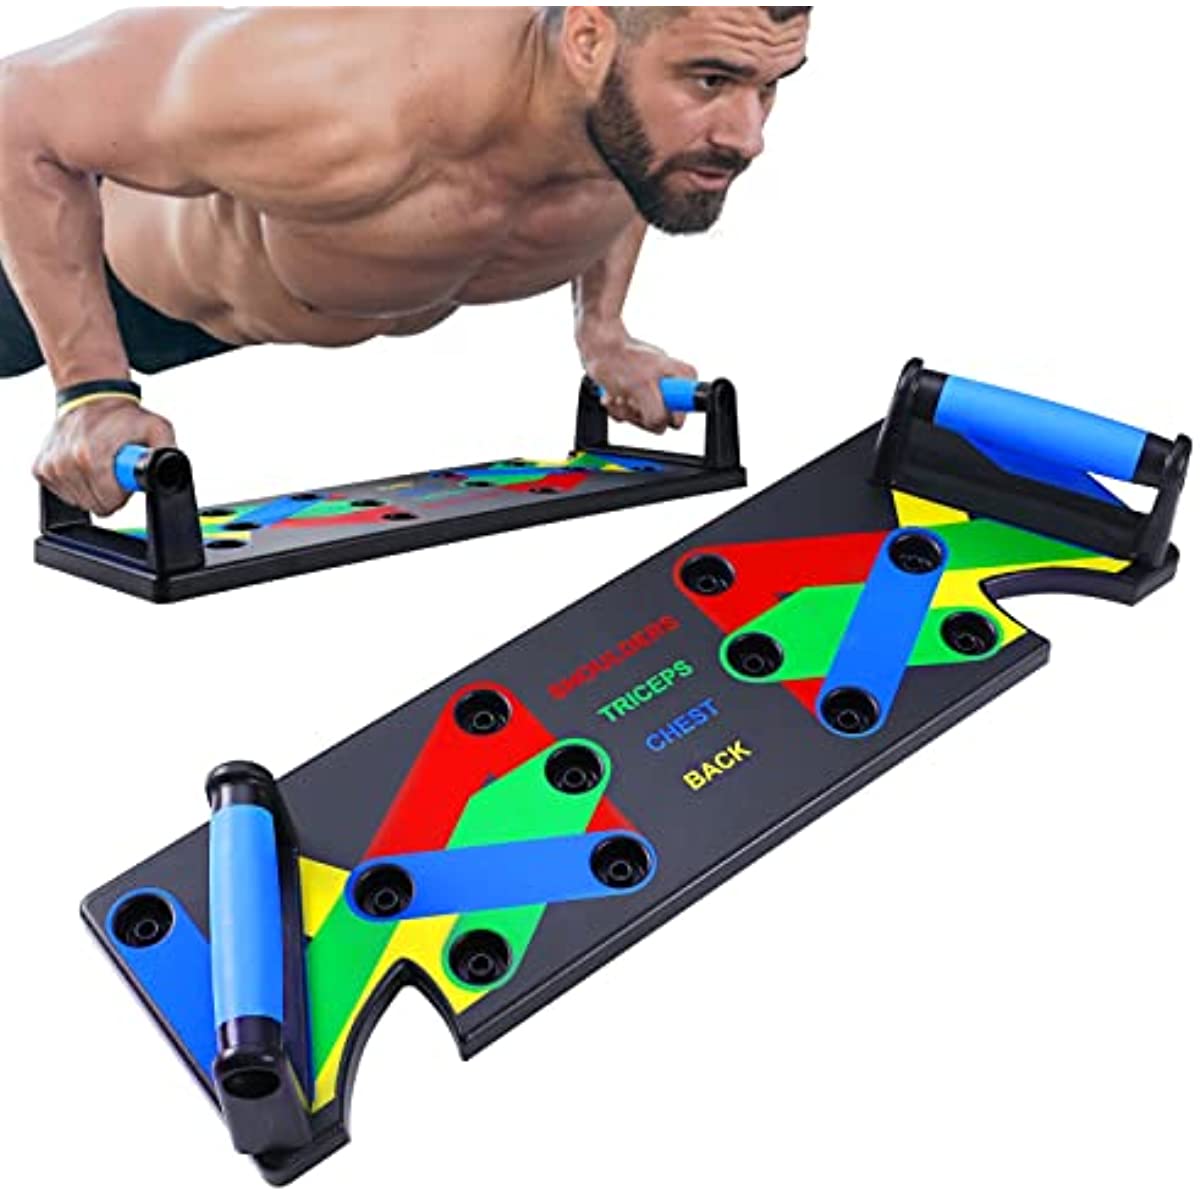 Push Up Board System Body Building Exercise Tools Workout Push Up Stands Portable Bracket Ultra